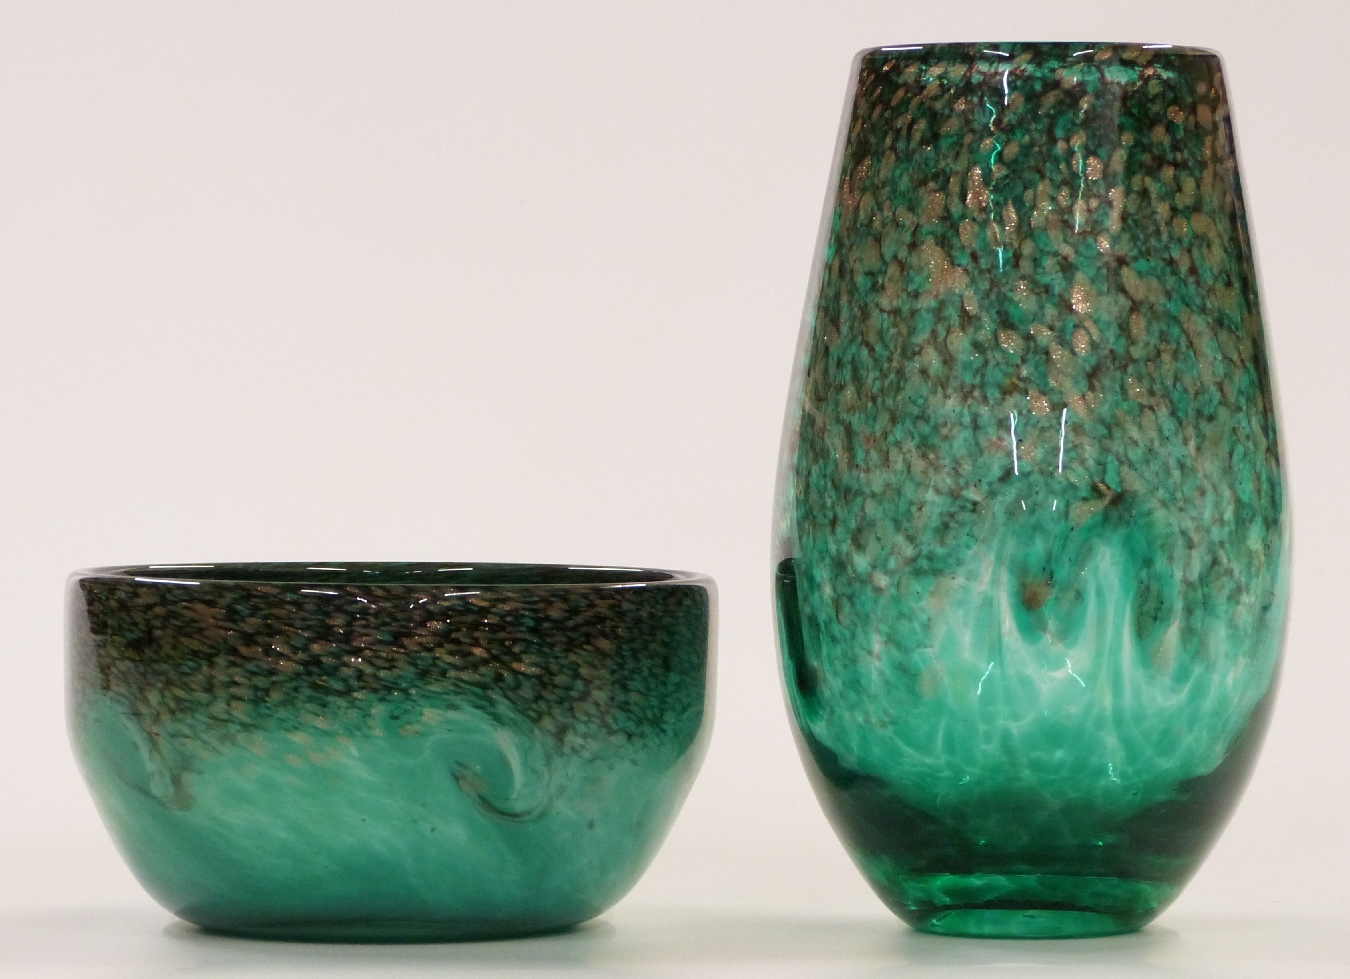 Two pieces of Strathearn glass both with green and black mottled ground and aventurine flecks, one a